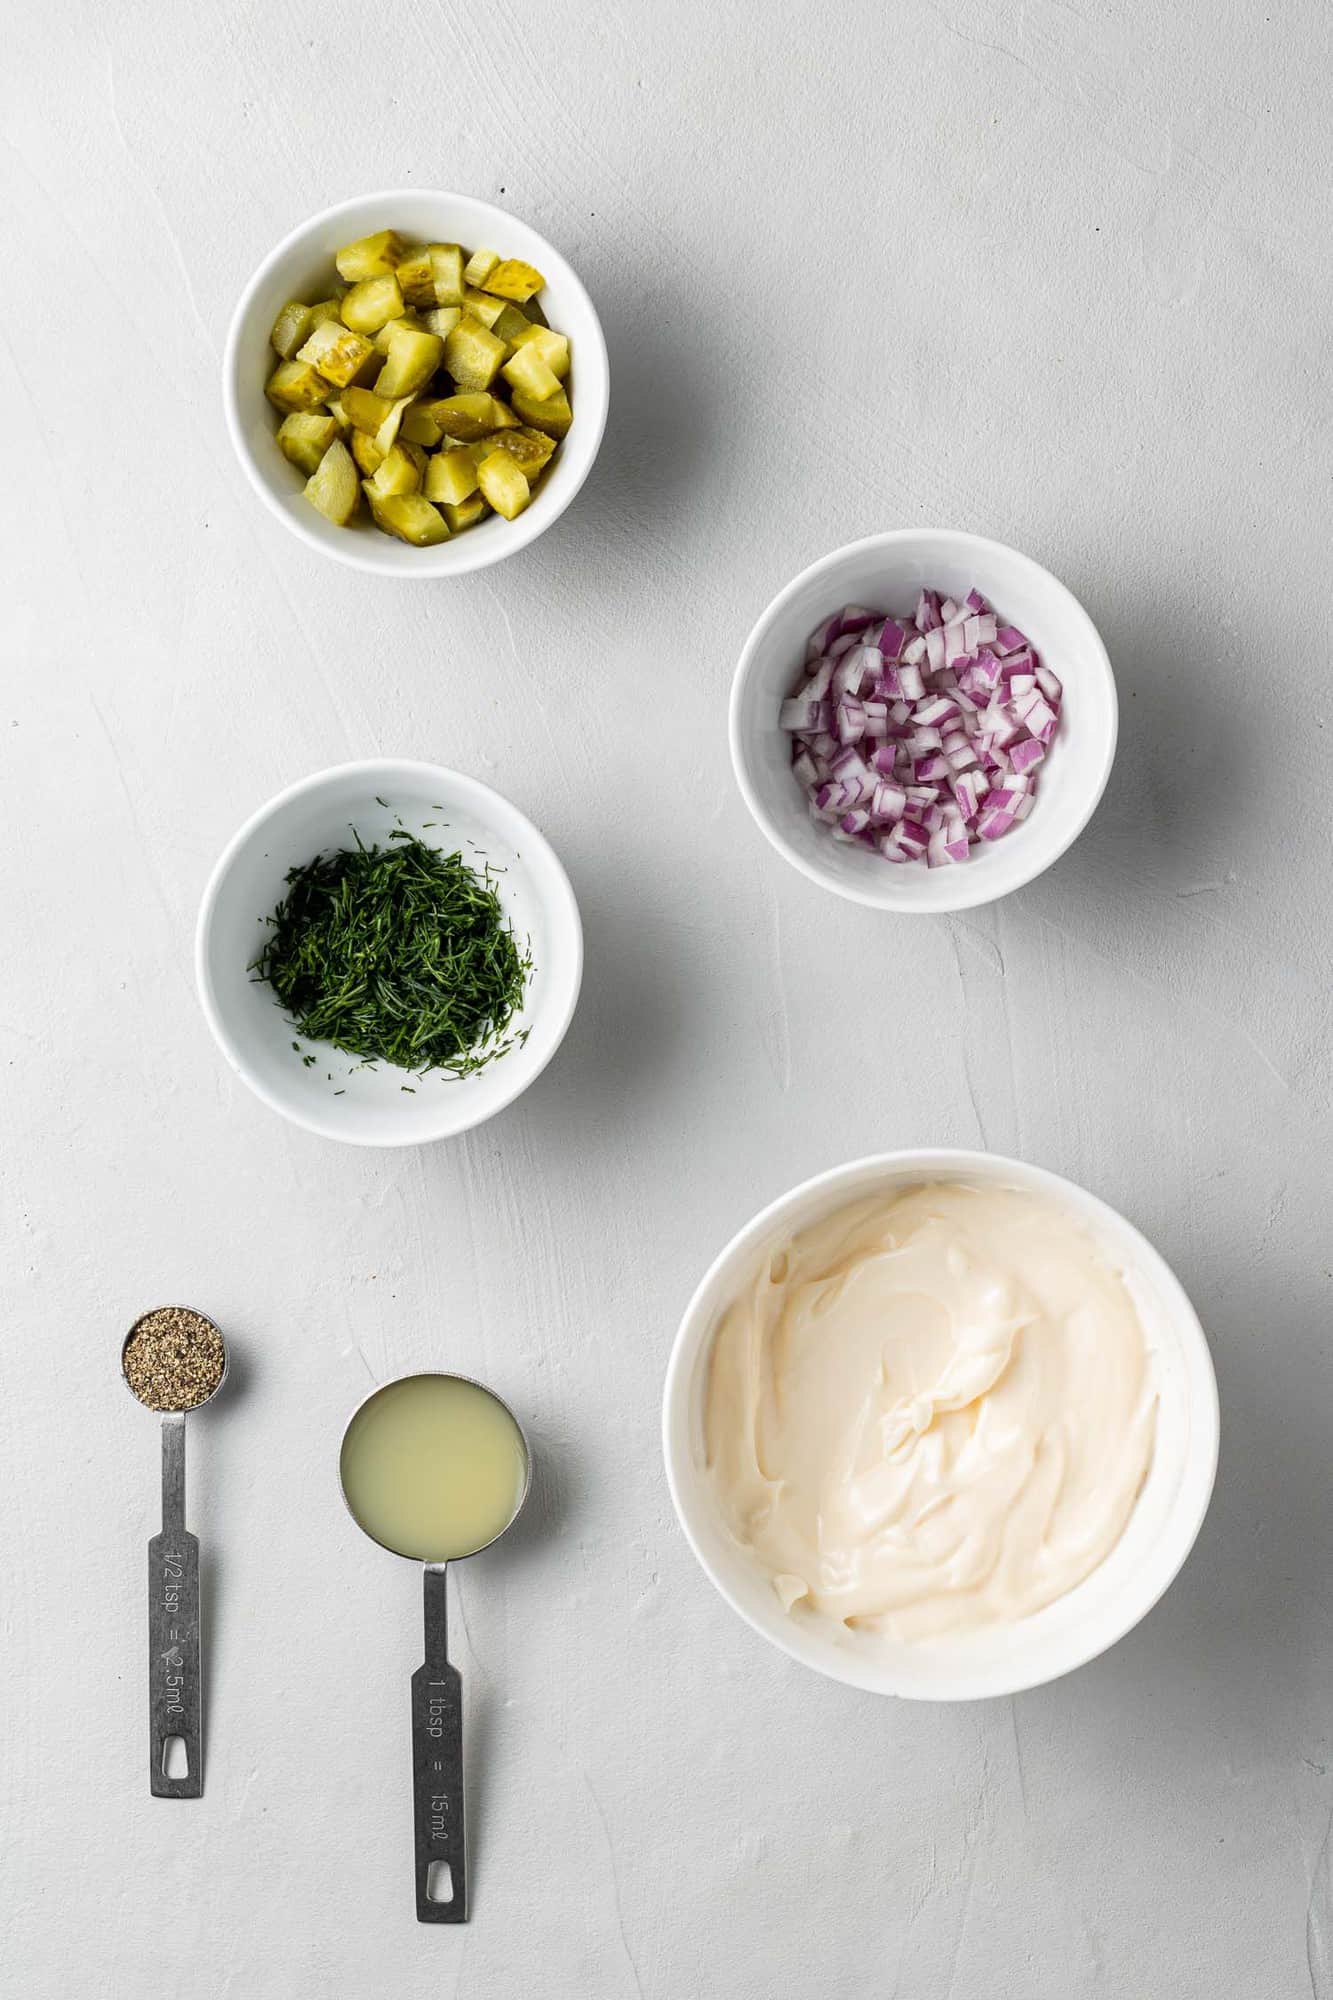 Overhead view of ingredients needed for recipe in small white bowls and measuring spoons.